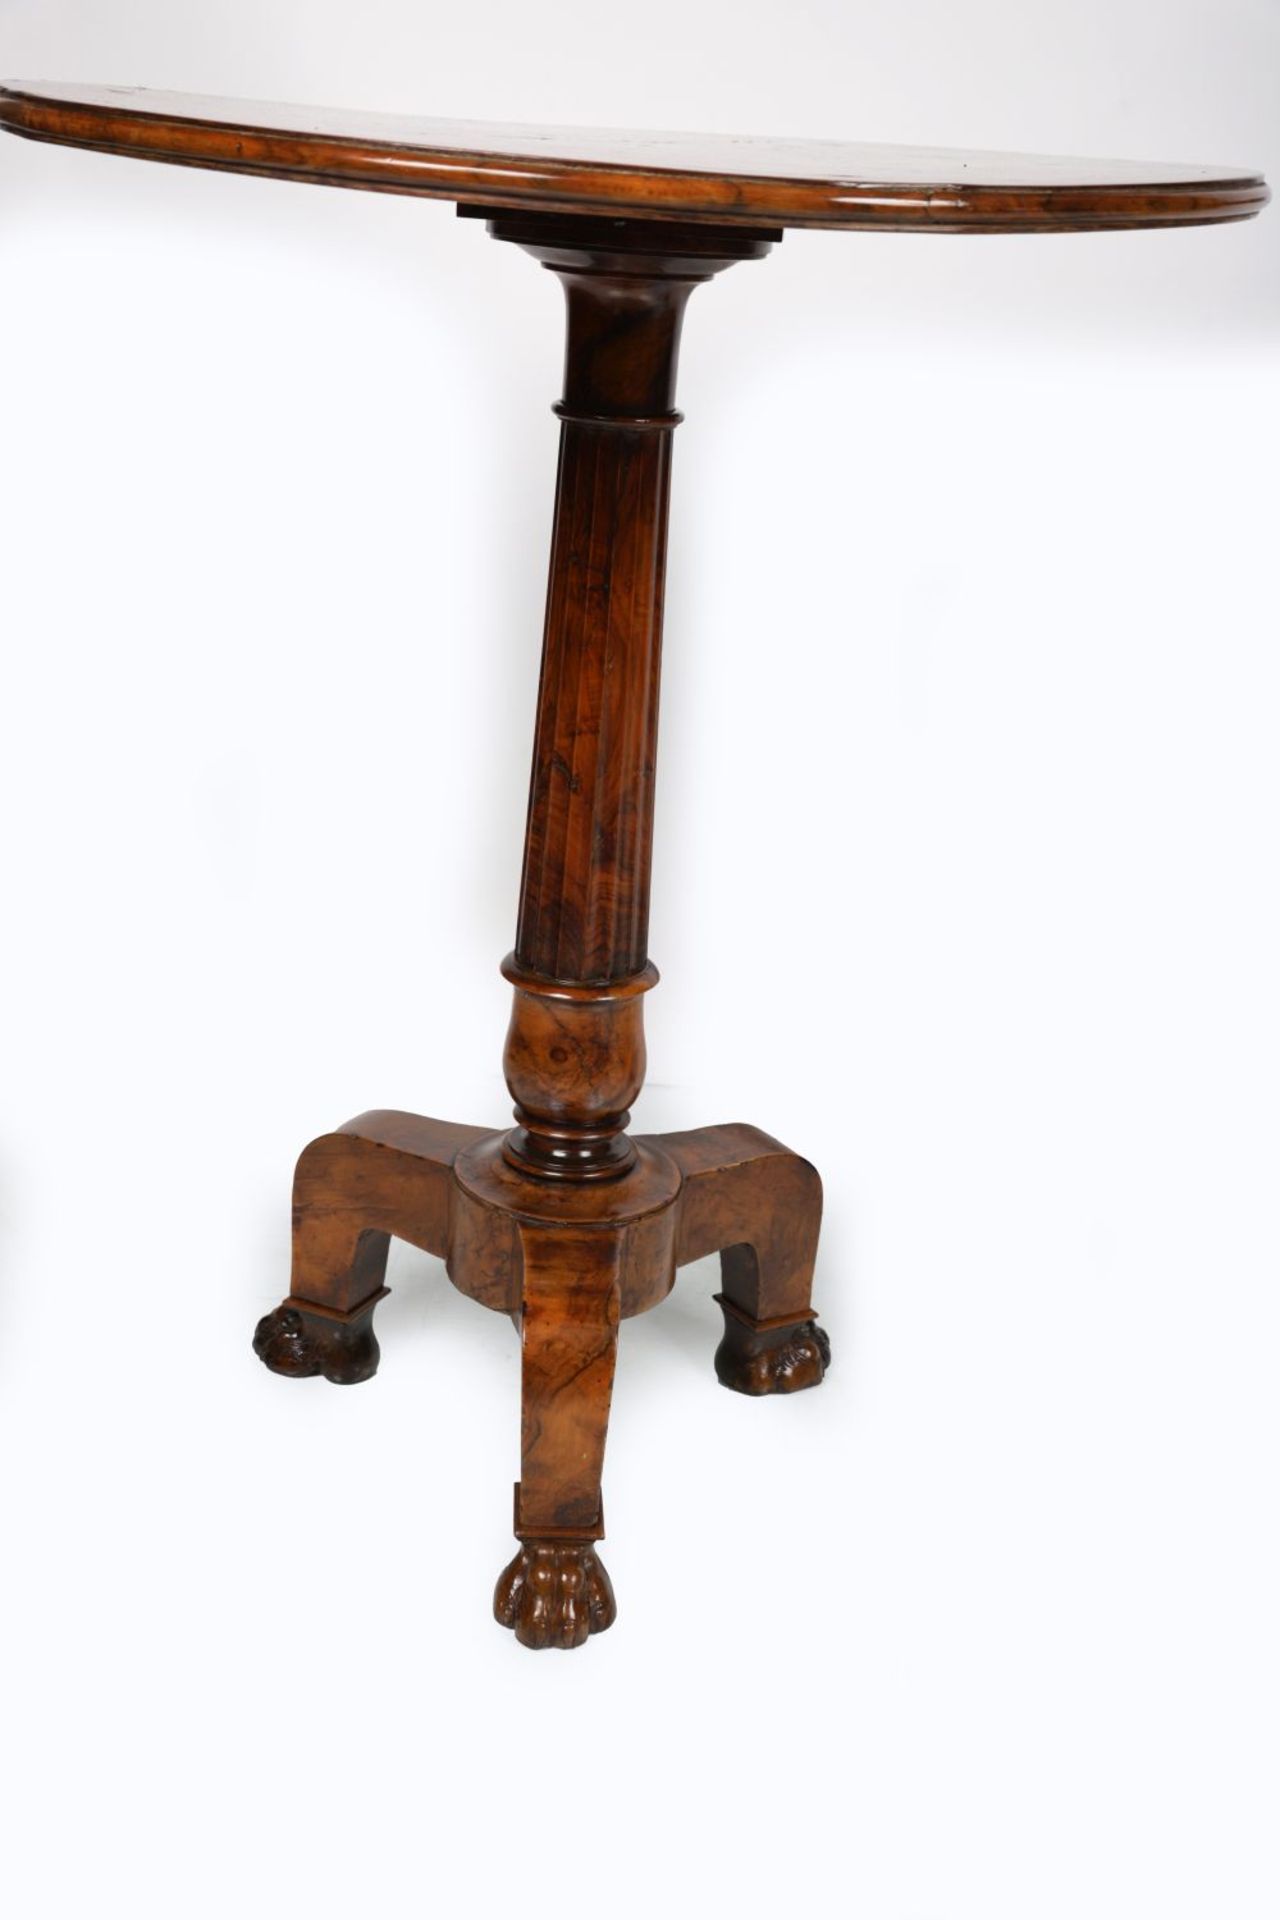 MATCHED PR 19TH-CENTURY WALNUT & INLAID TABLES - Image 3 of 3